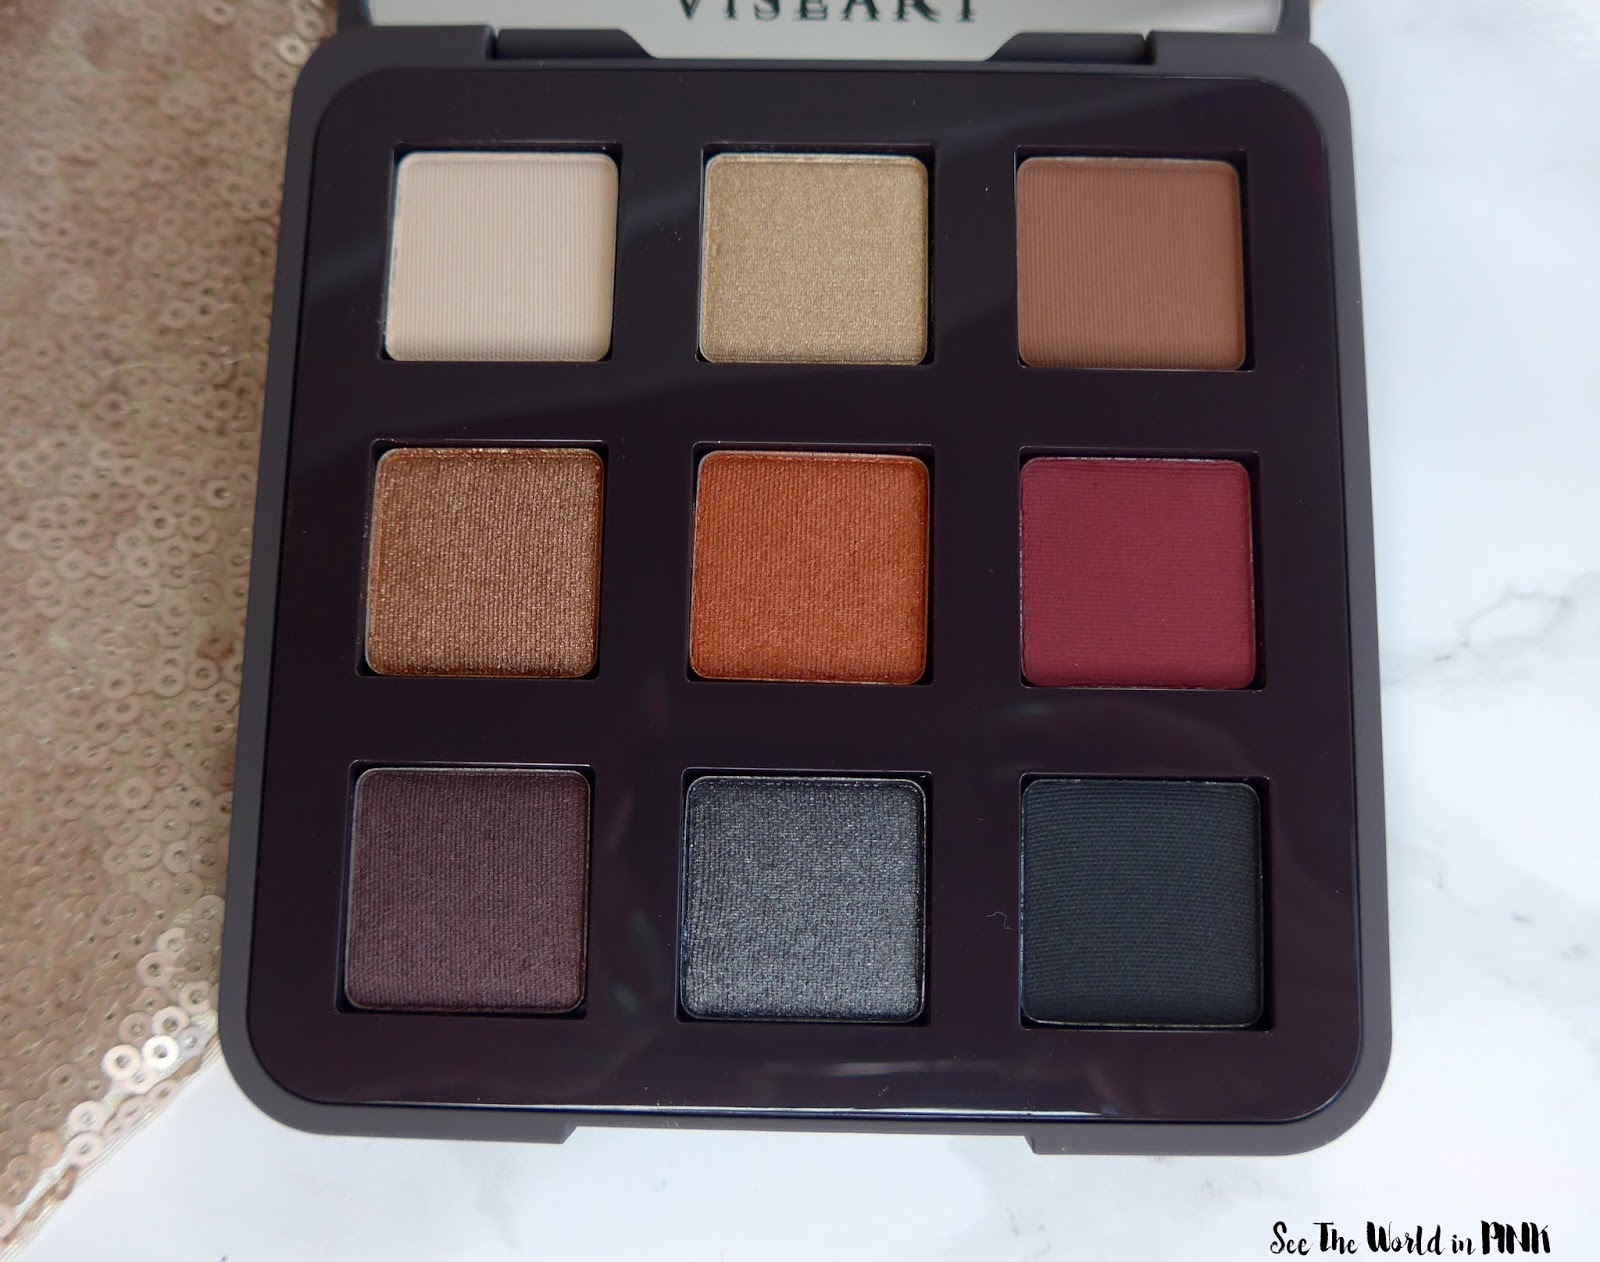 Viseart Golden Hour Eyeshadow Palette - 3 Looks, Swatches, and Review